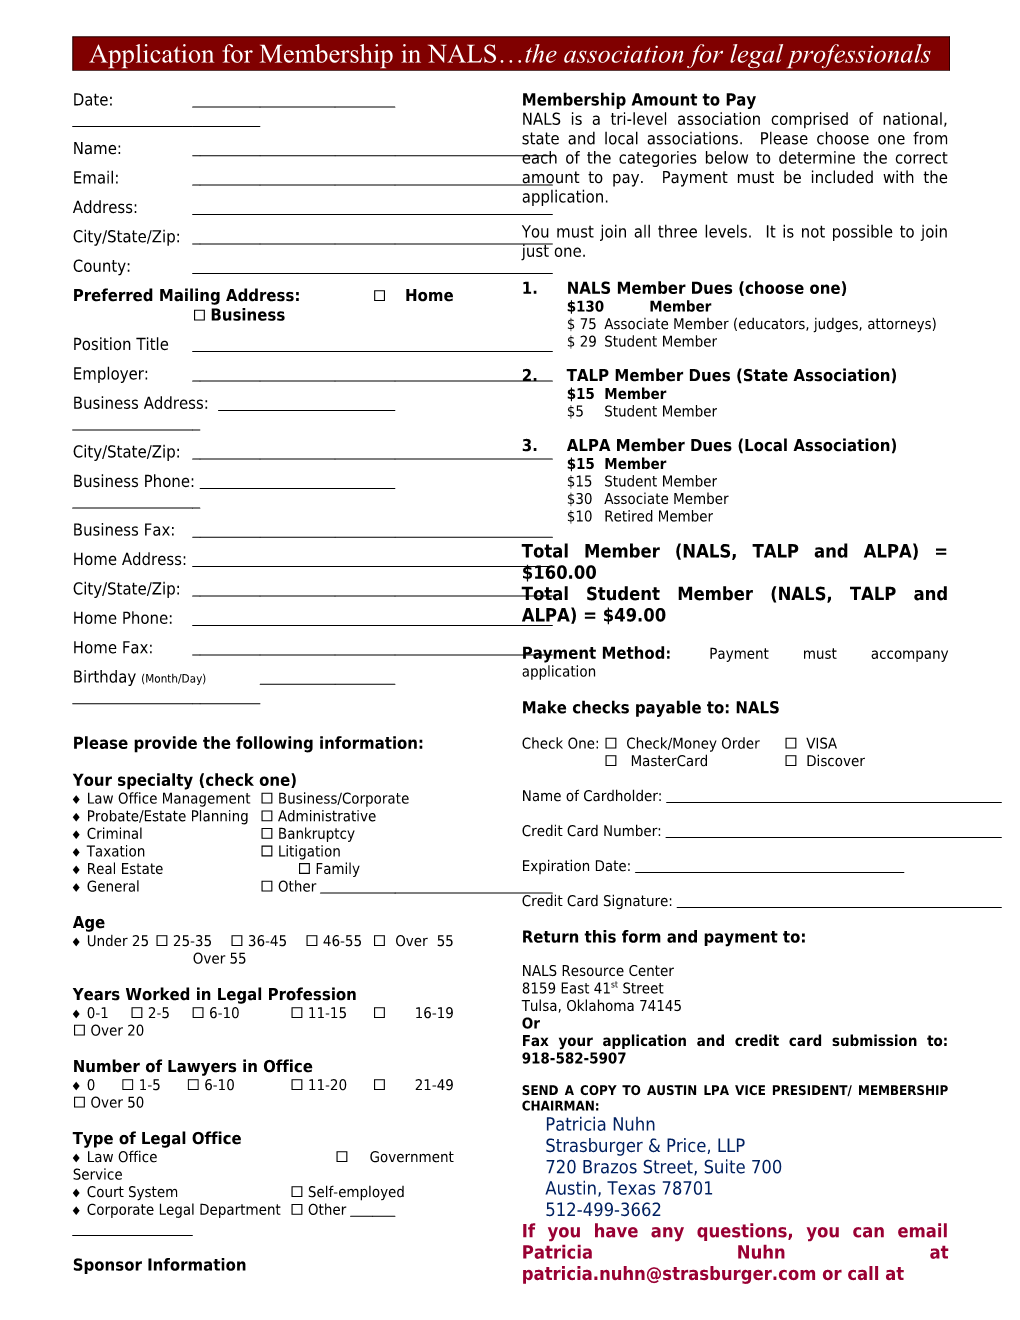 Application for Membership in NALS the Association for Legal Professionals